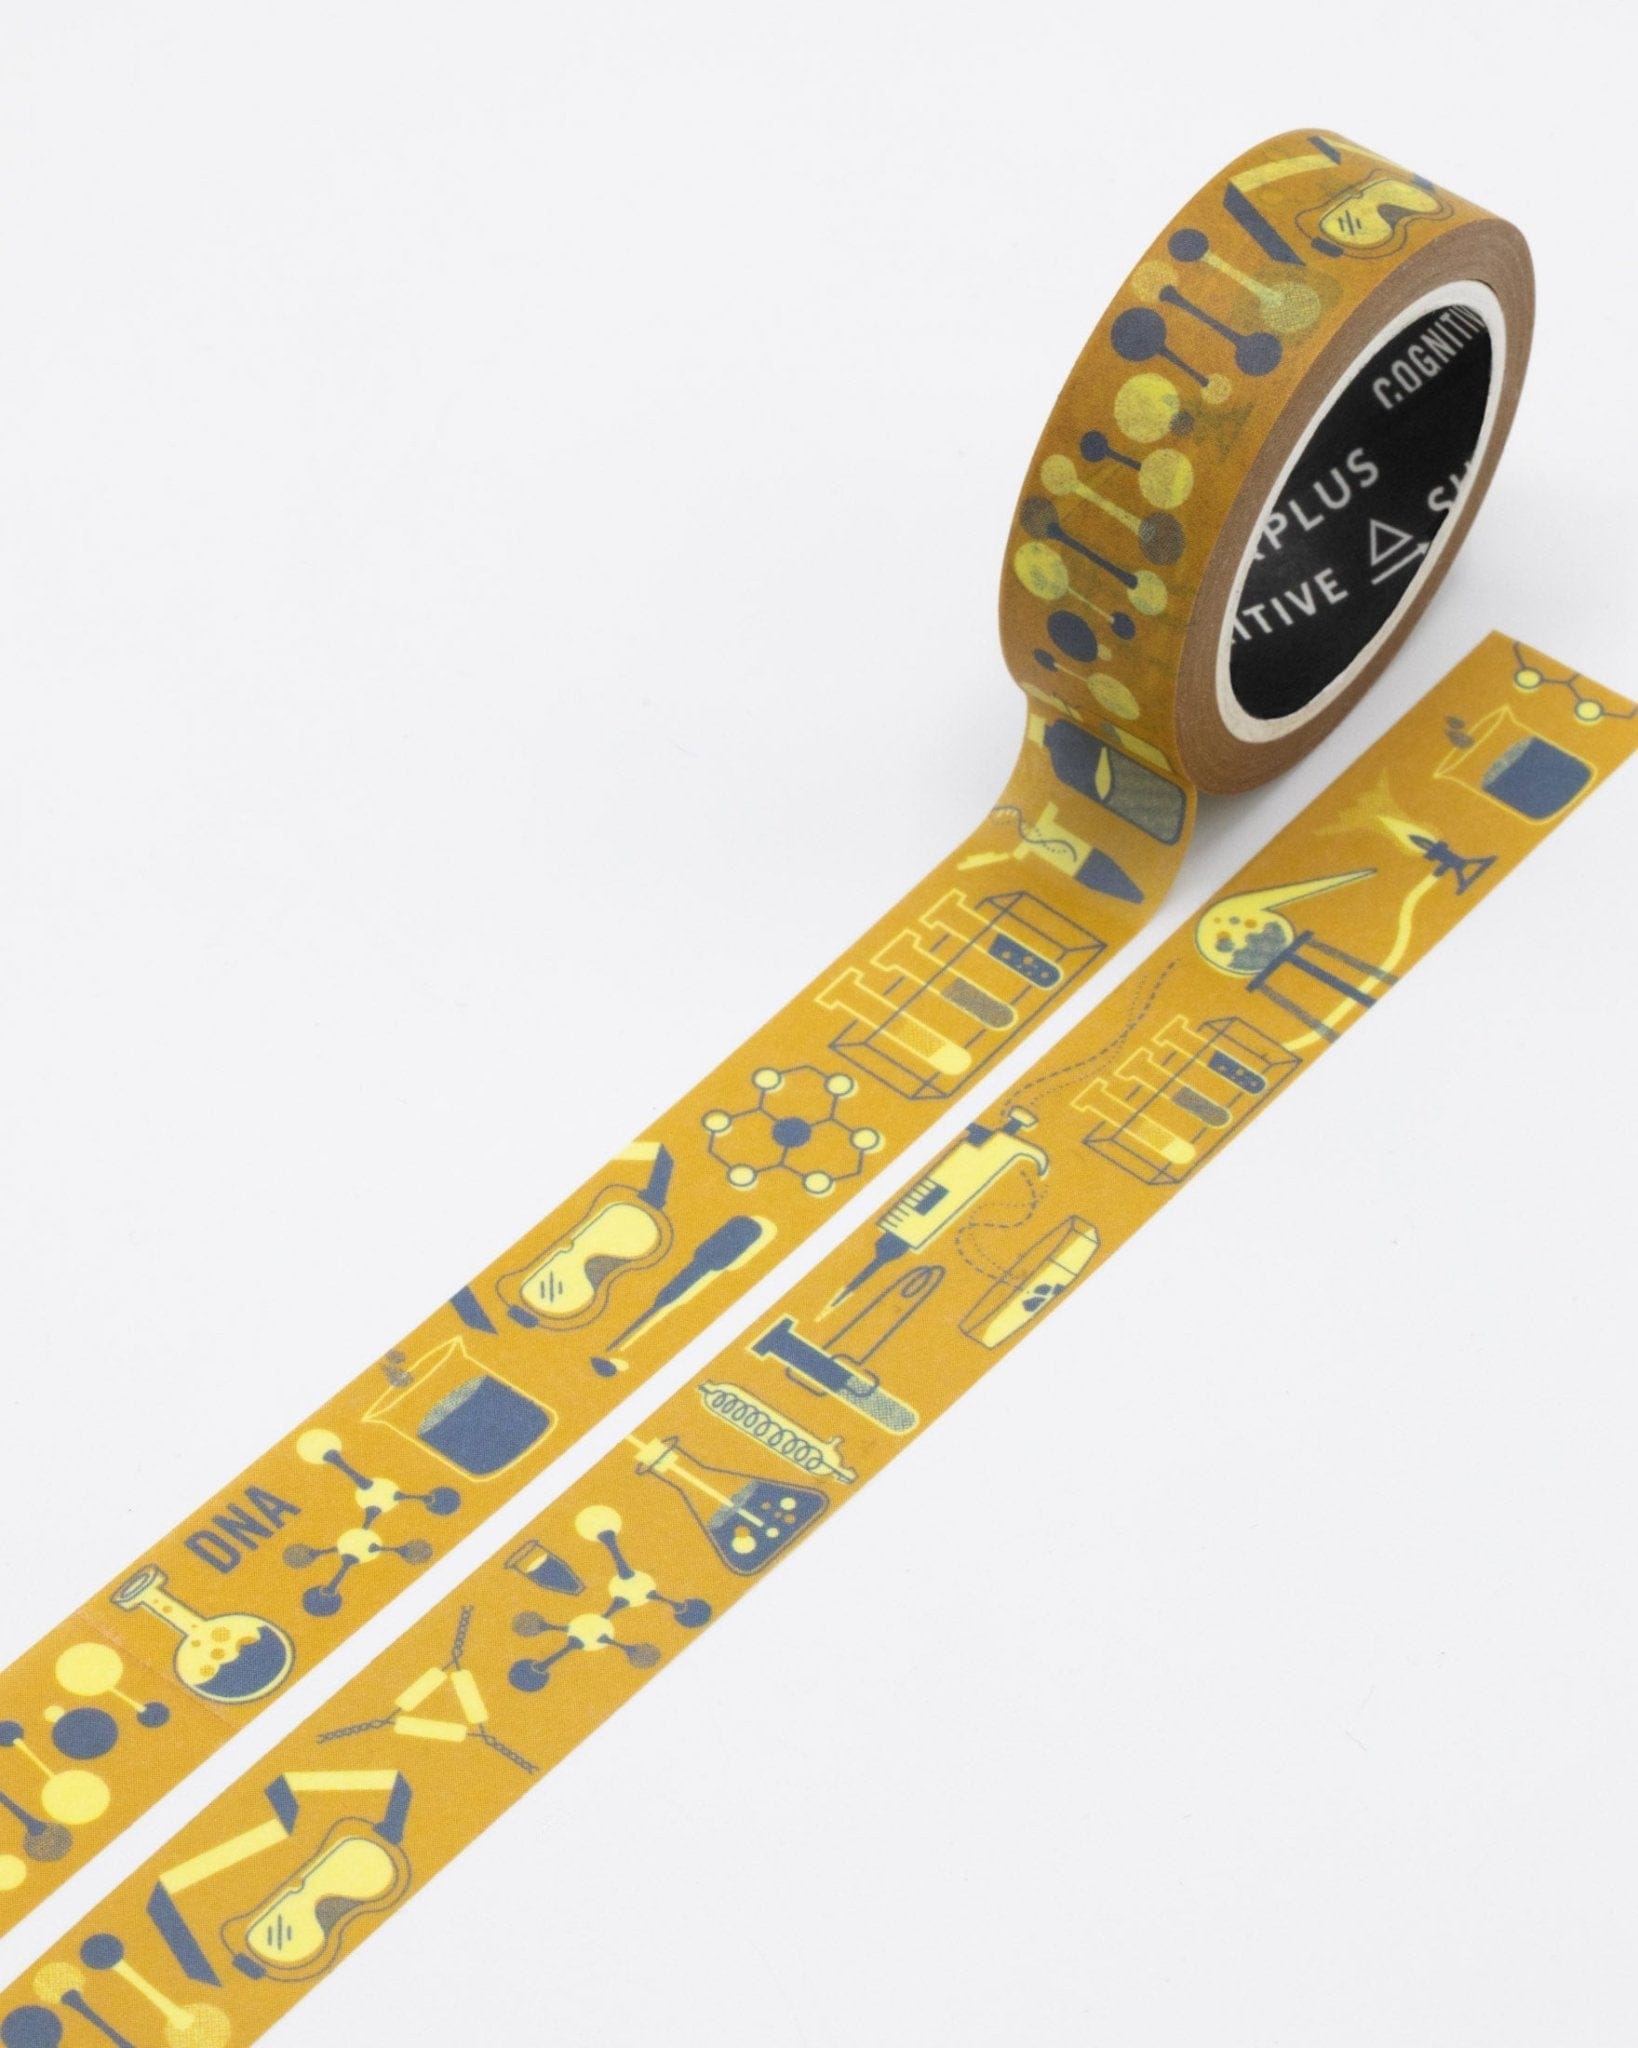 Colorful washi tape with a cute pattern. for decorating greeting